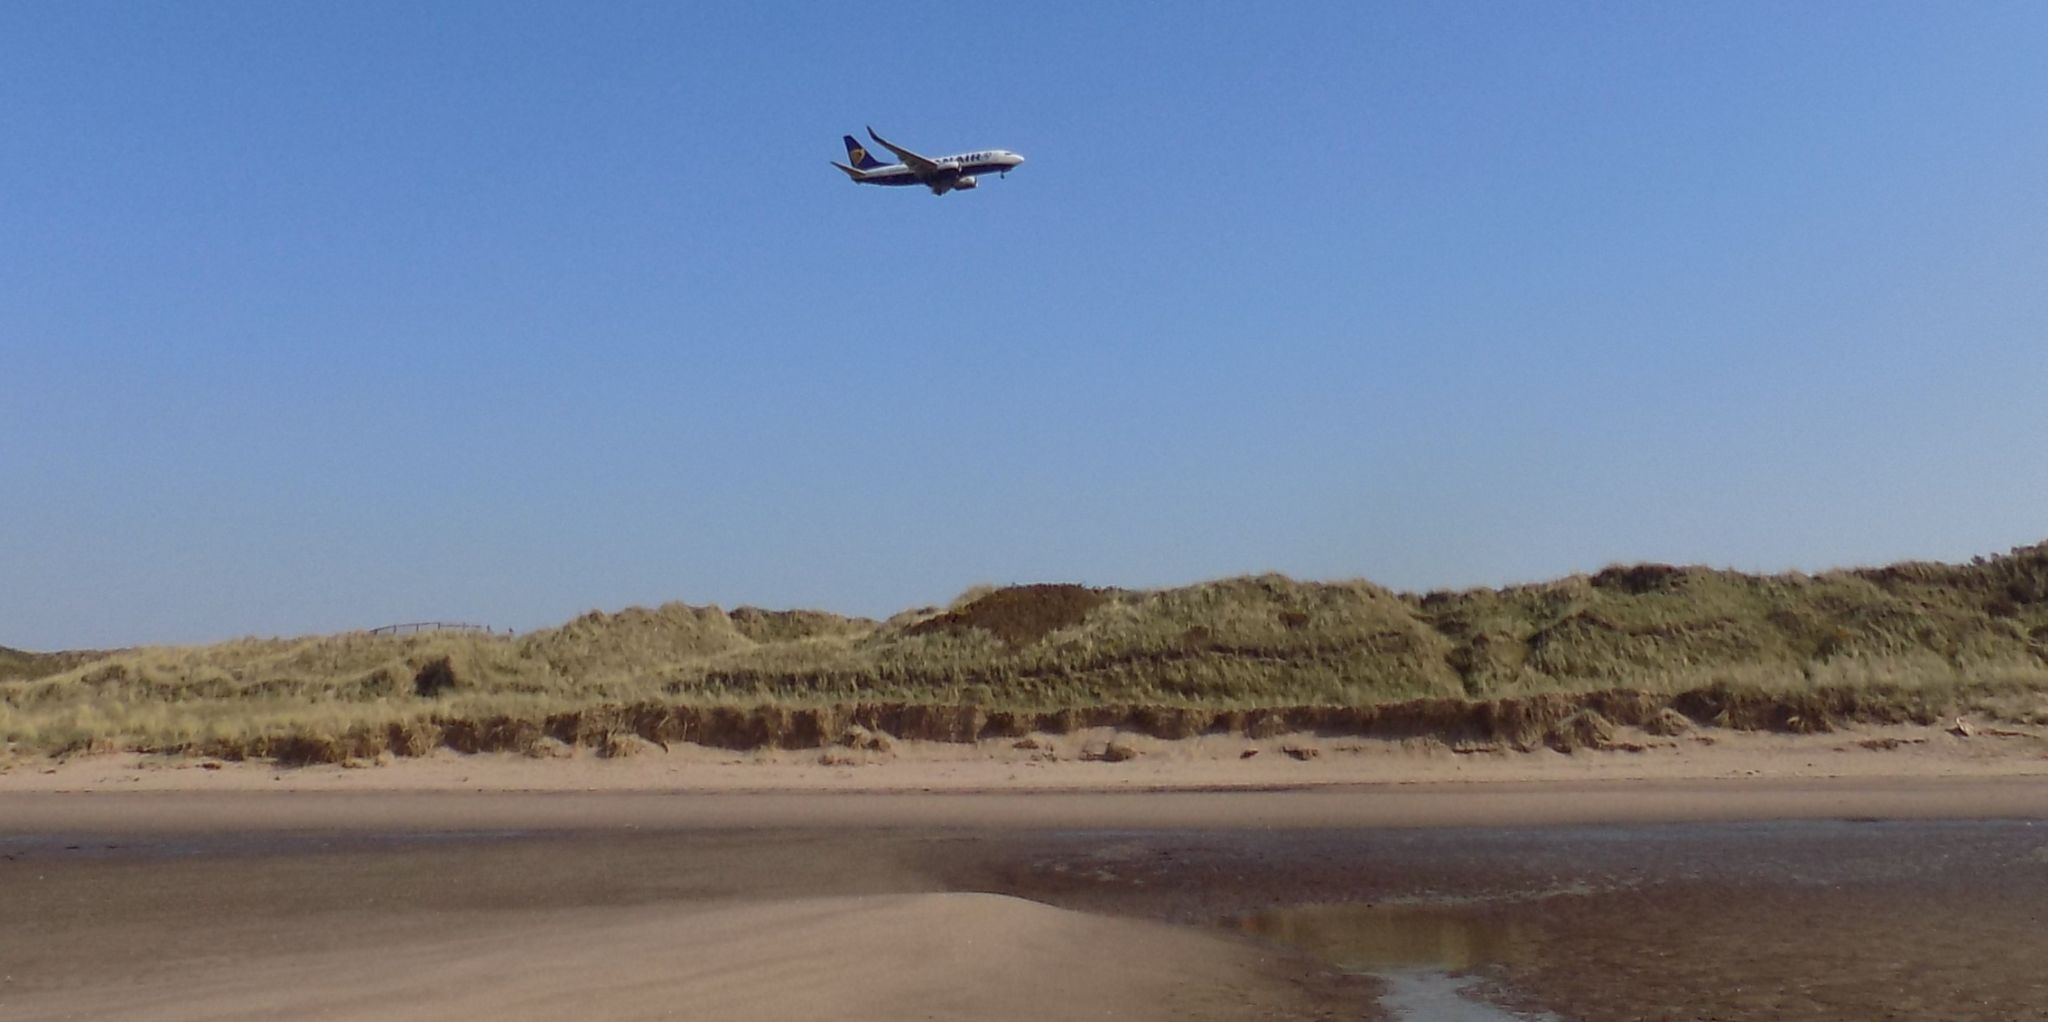 Plane landing at Prestwick Airport above sand dunes and beach